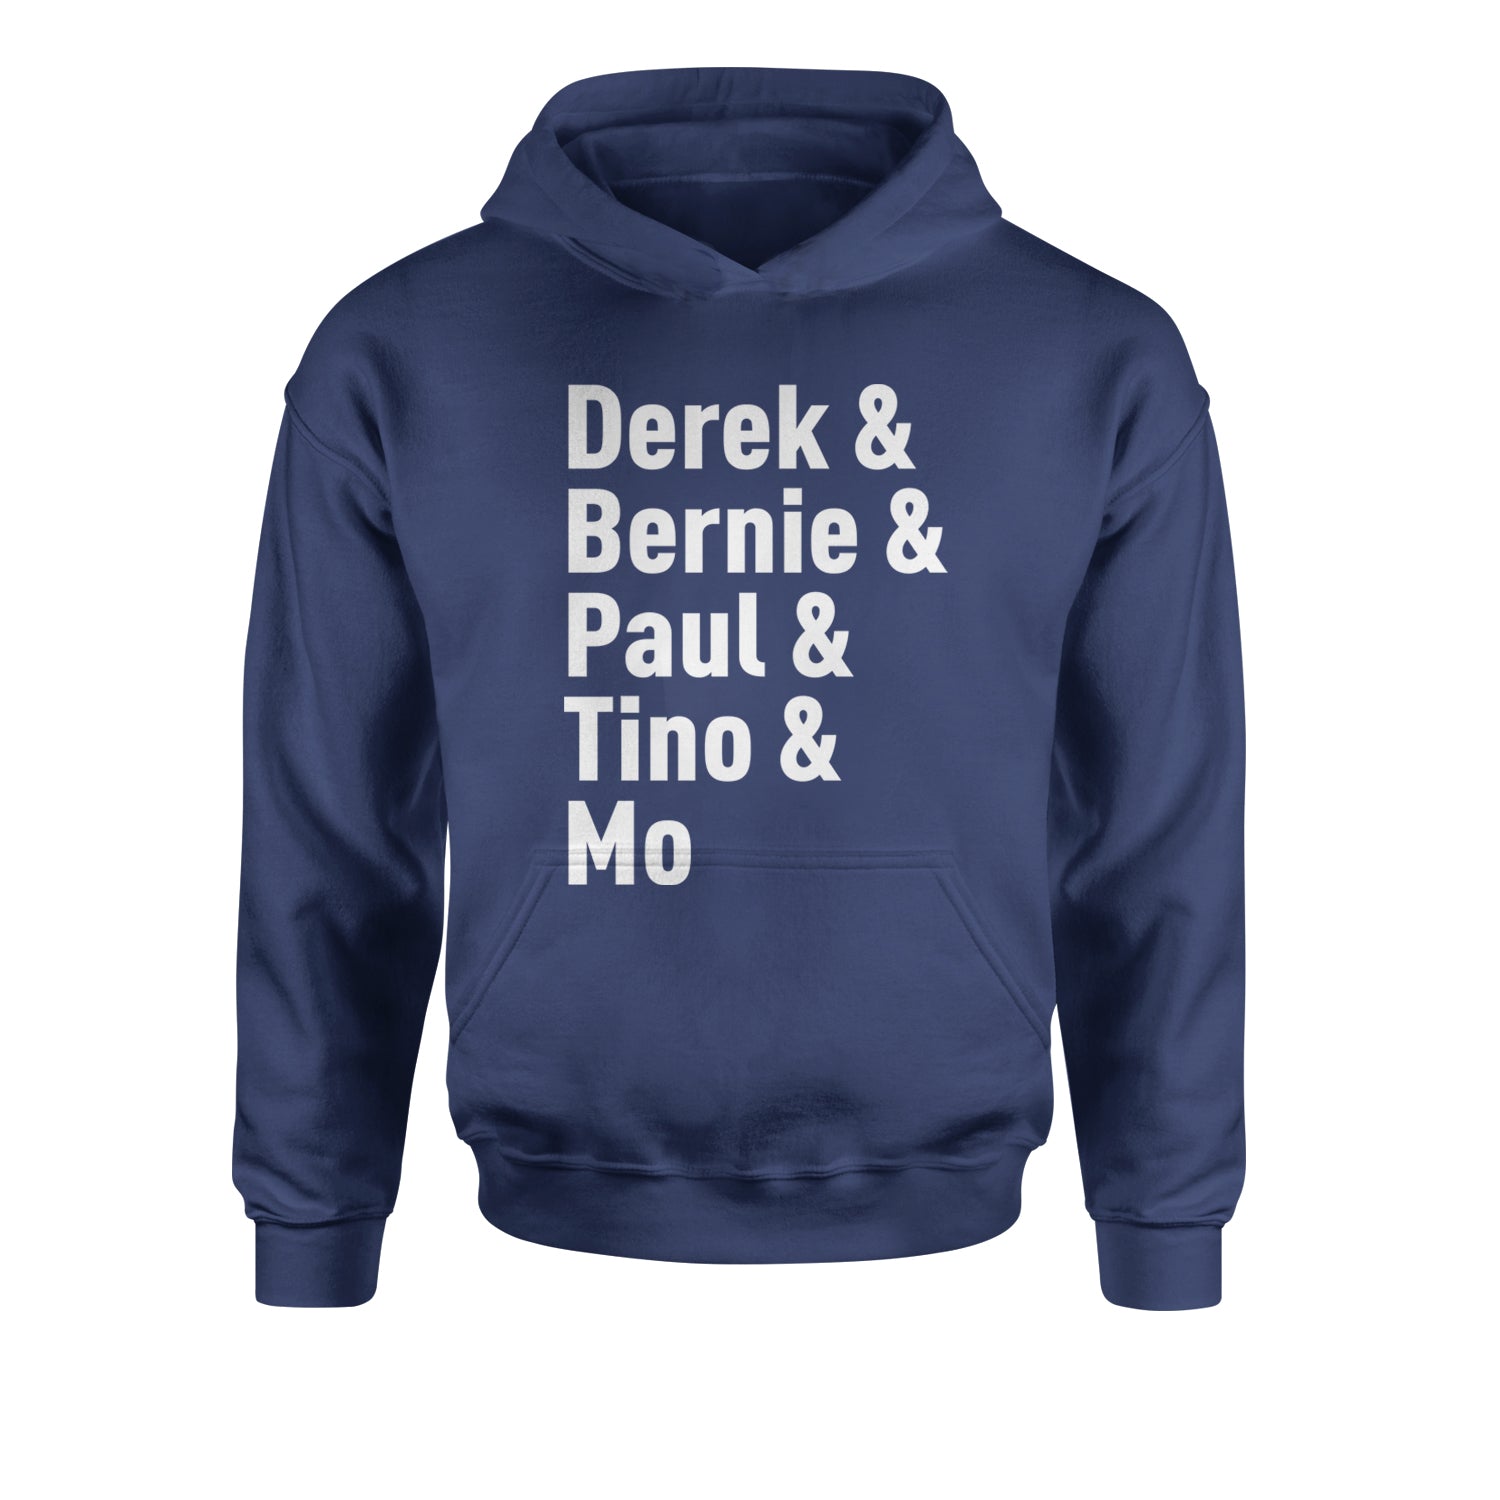 Derek and Bernie and Paul and Tino and Mo Youth-Sized Hoodie baseball, comes, here, judge, the by Expression Tees